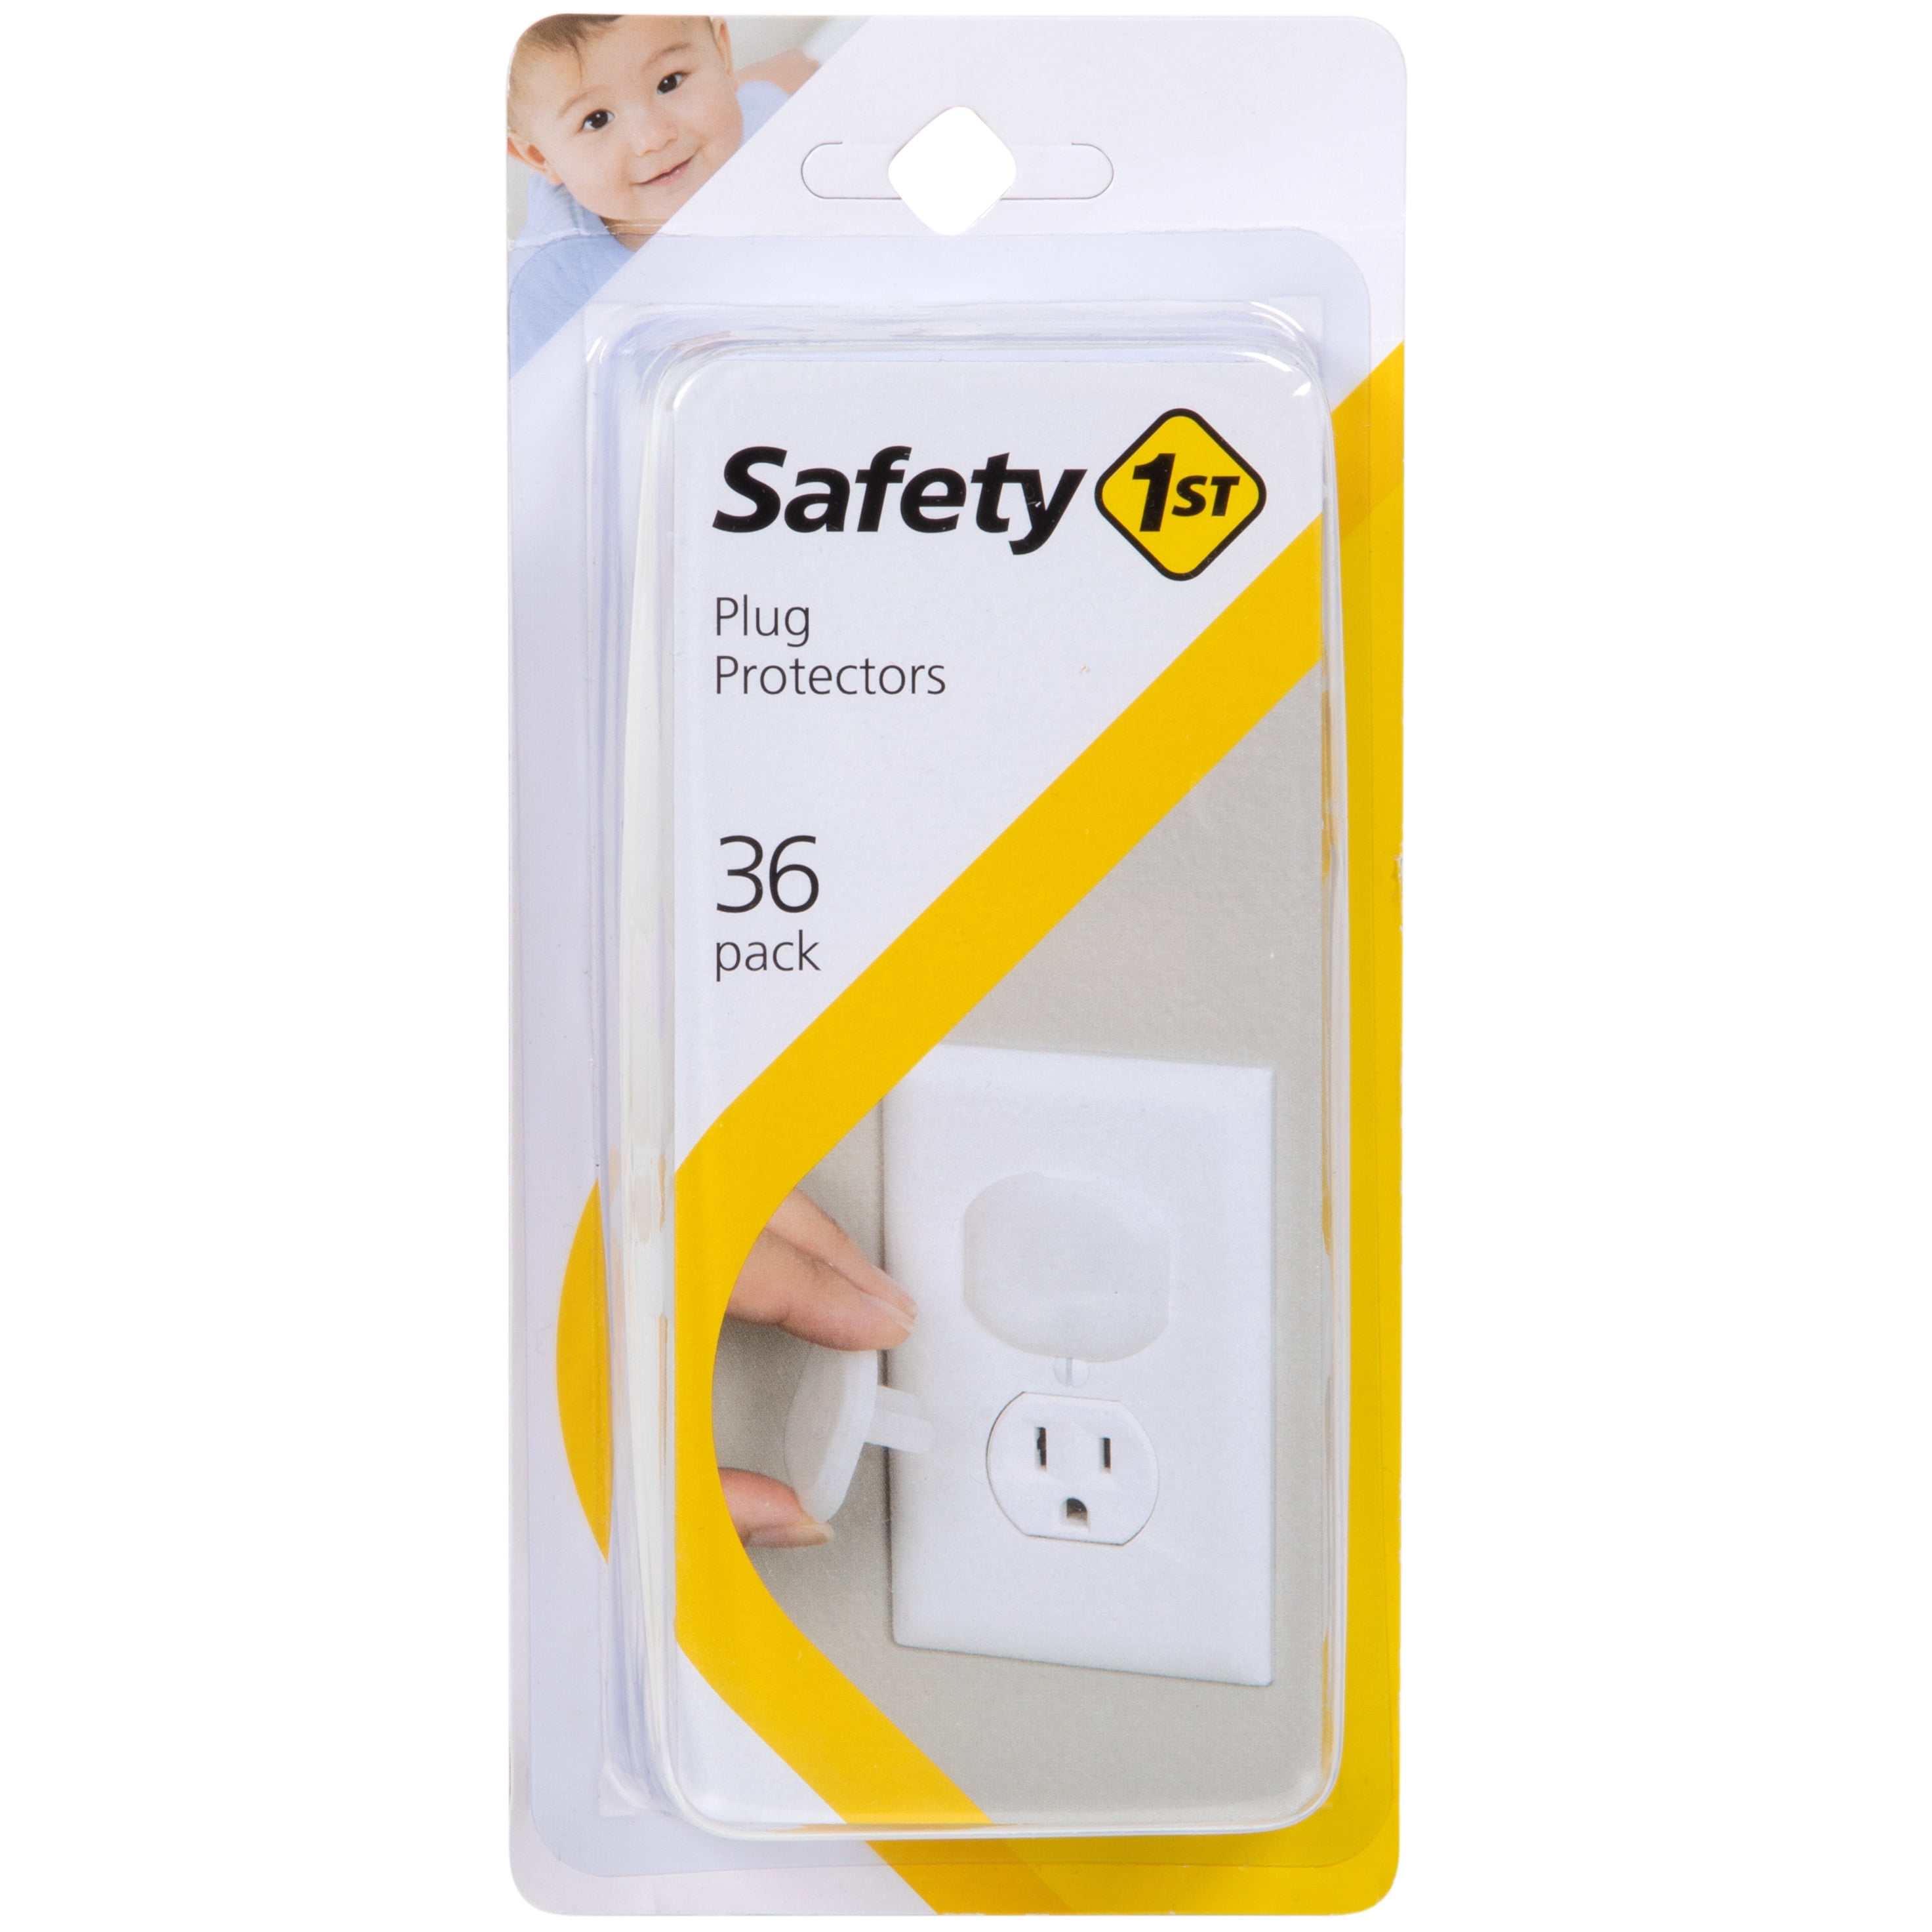 Safety Cap Outlet Plugs 12 Count Avoid Electric Shocks 